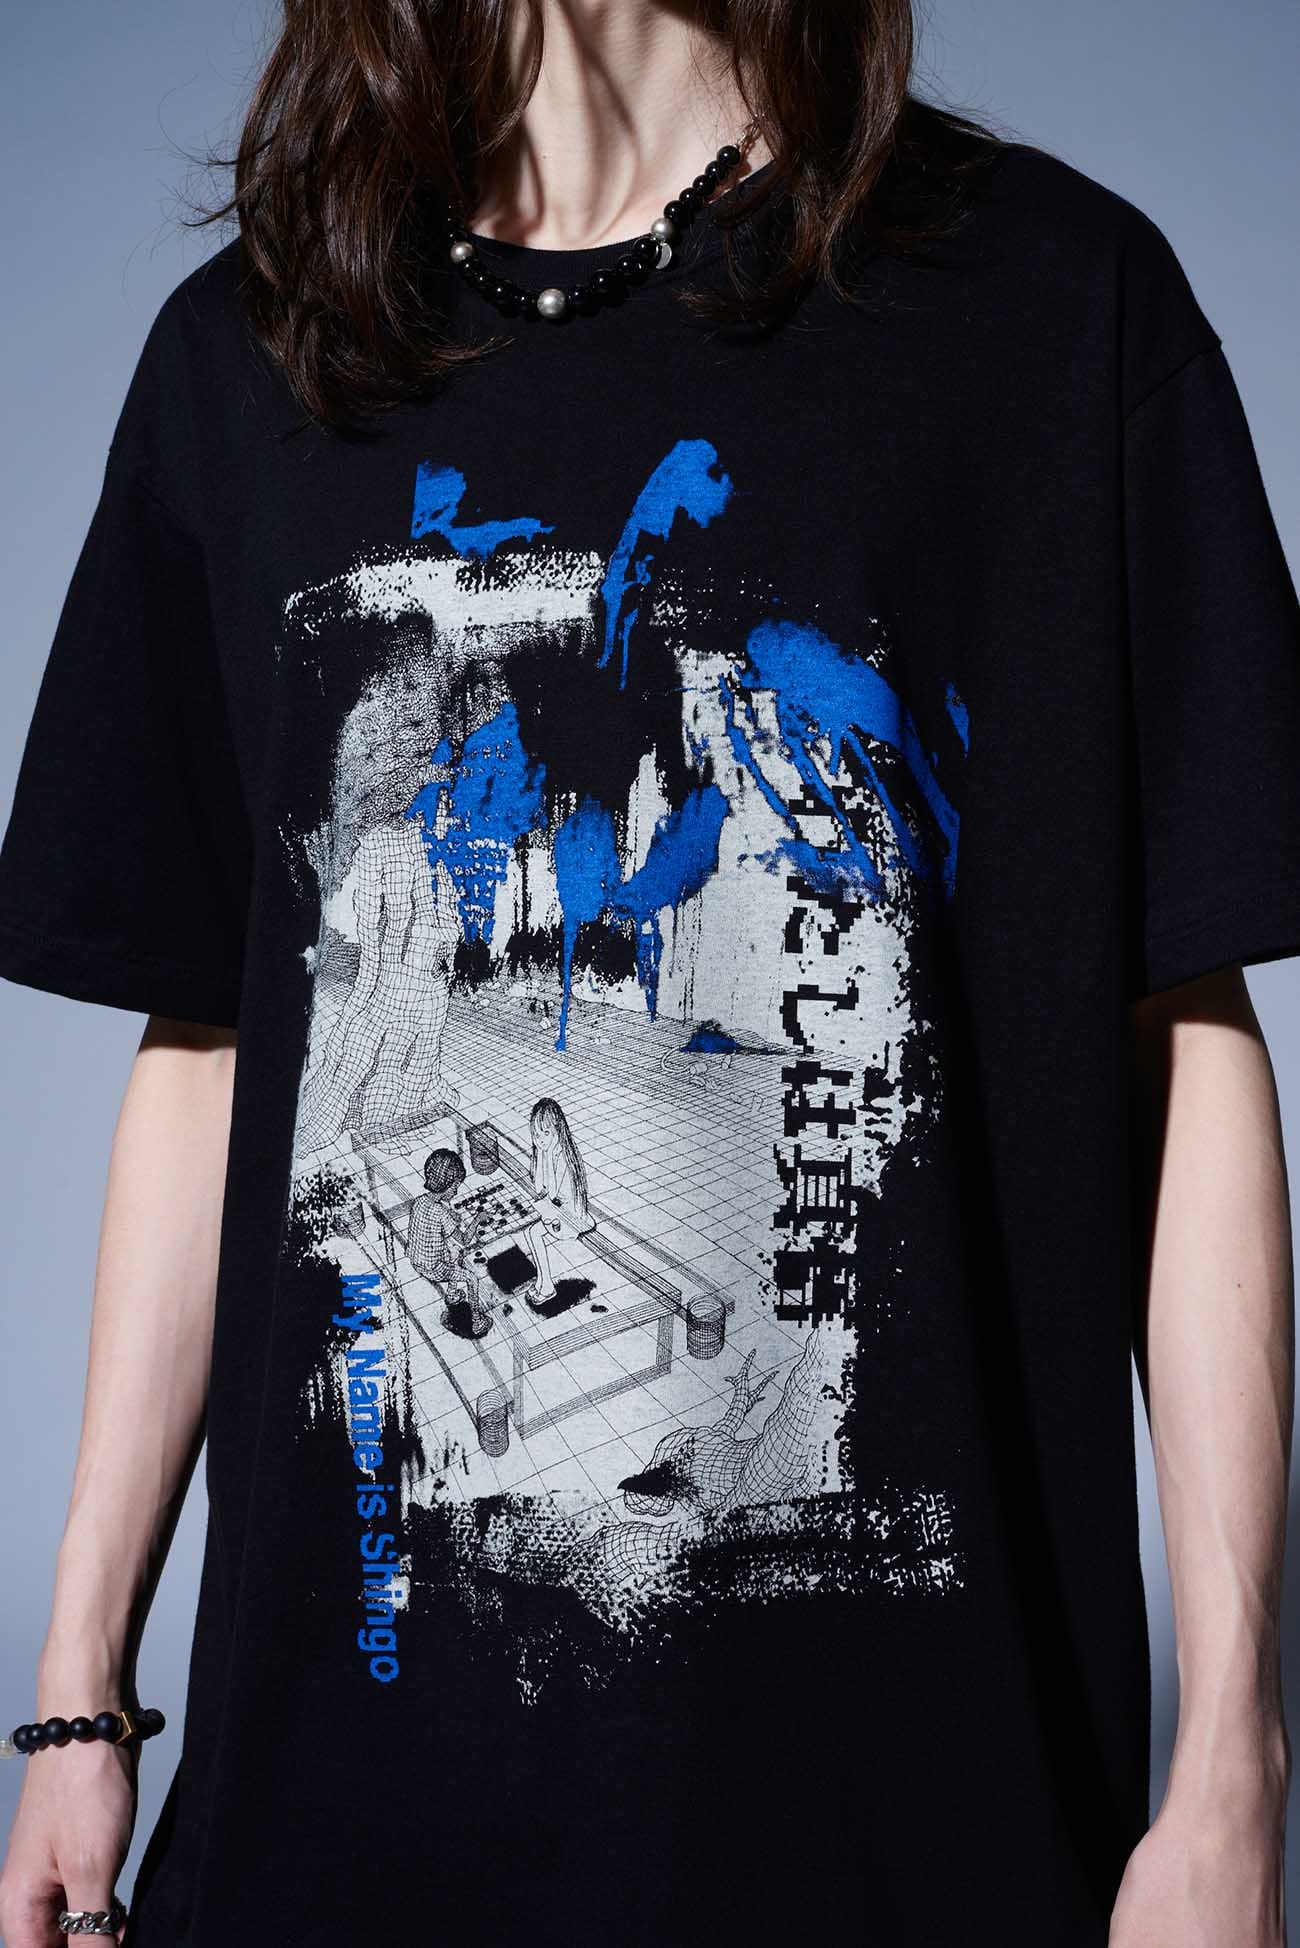 S'YTExKAZUO UMEZZ-MY NAME IS SHINGO- C/JERSEY T-SHIRT PRINTED WITH COMICS COVER ART”Cyber world”